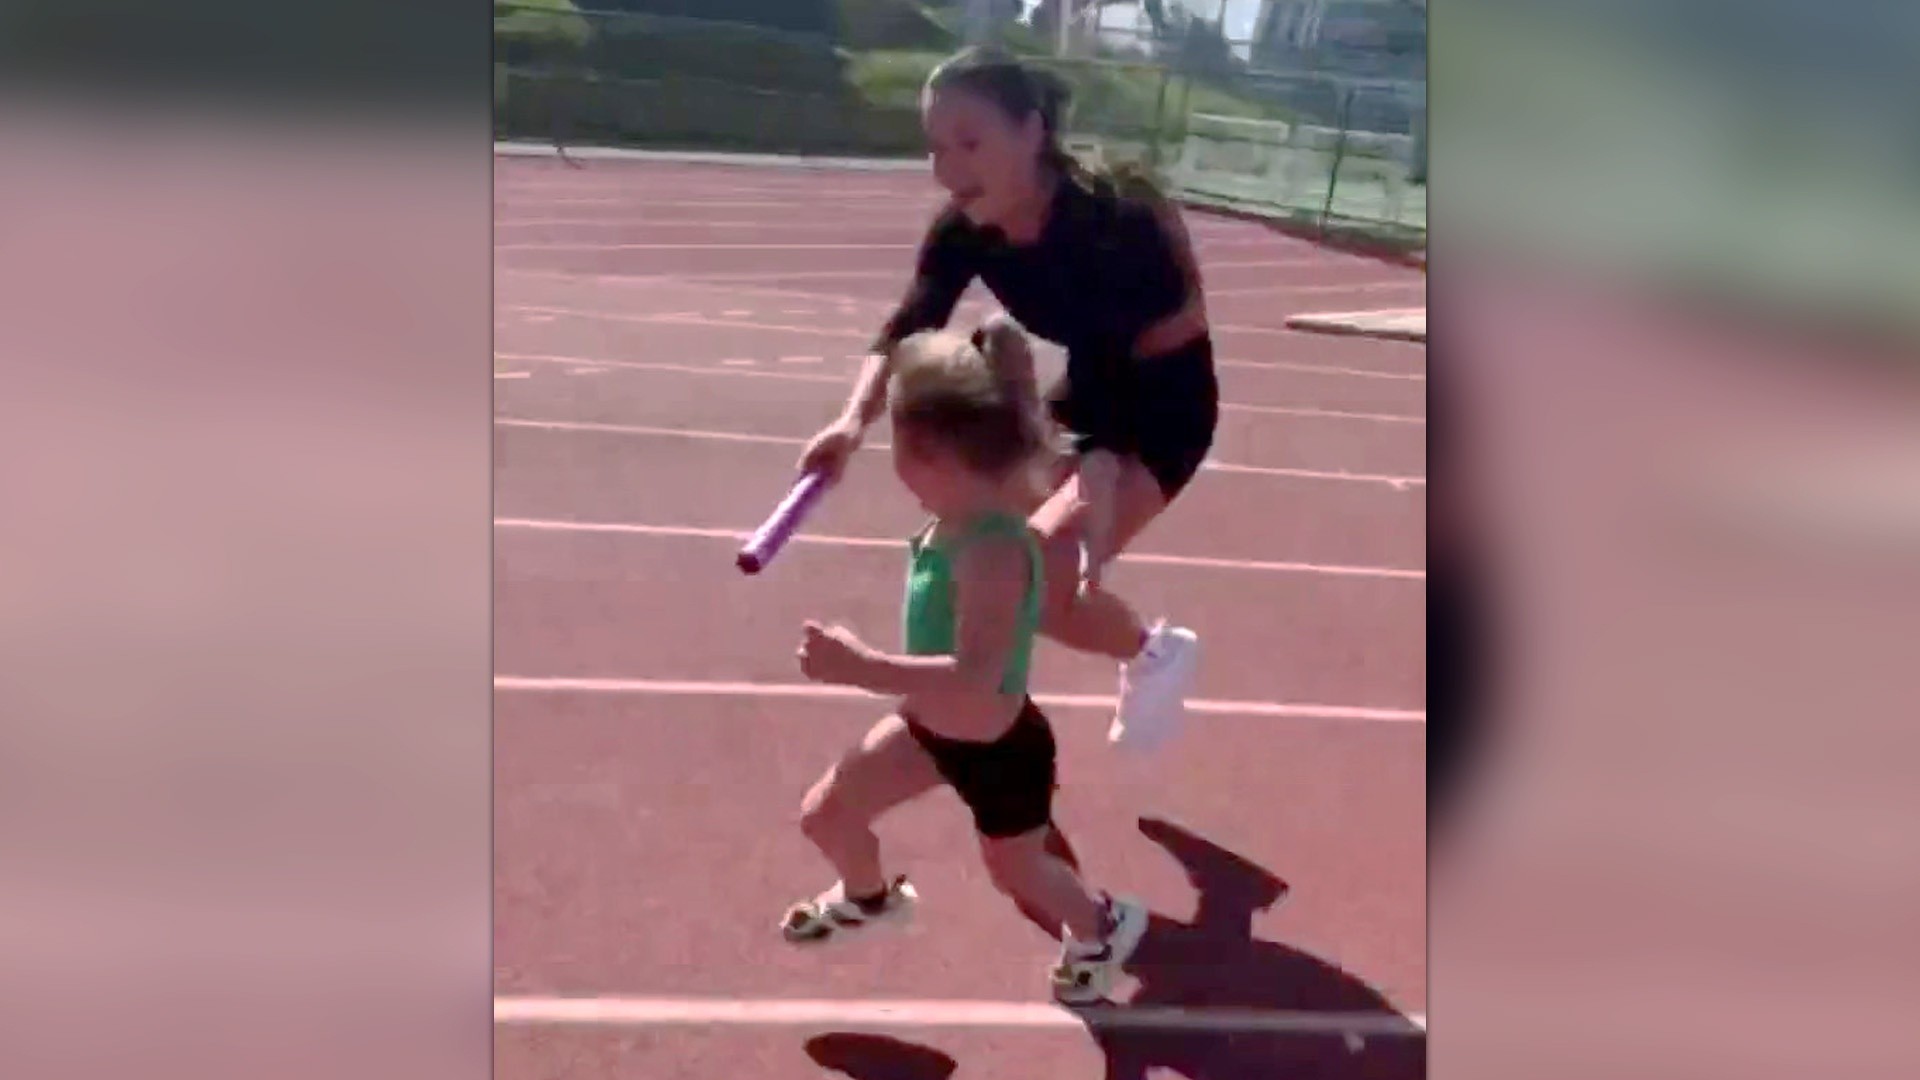 3-year-old runs away during relay race baton pass in funny video